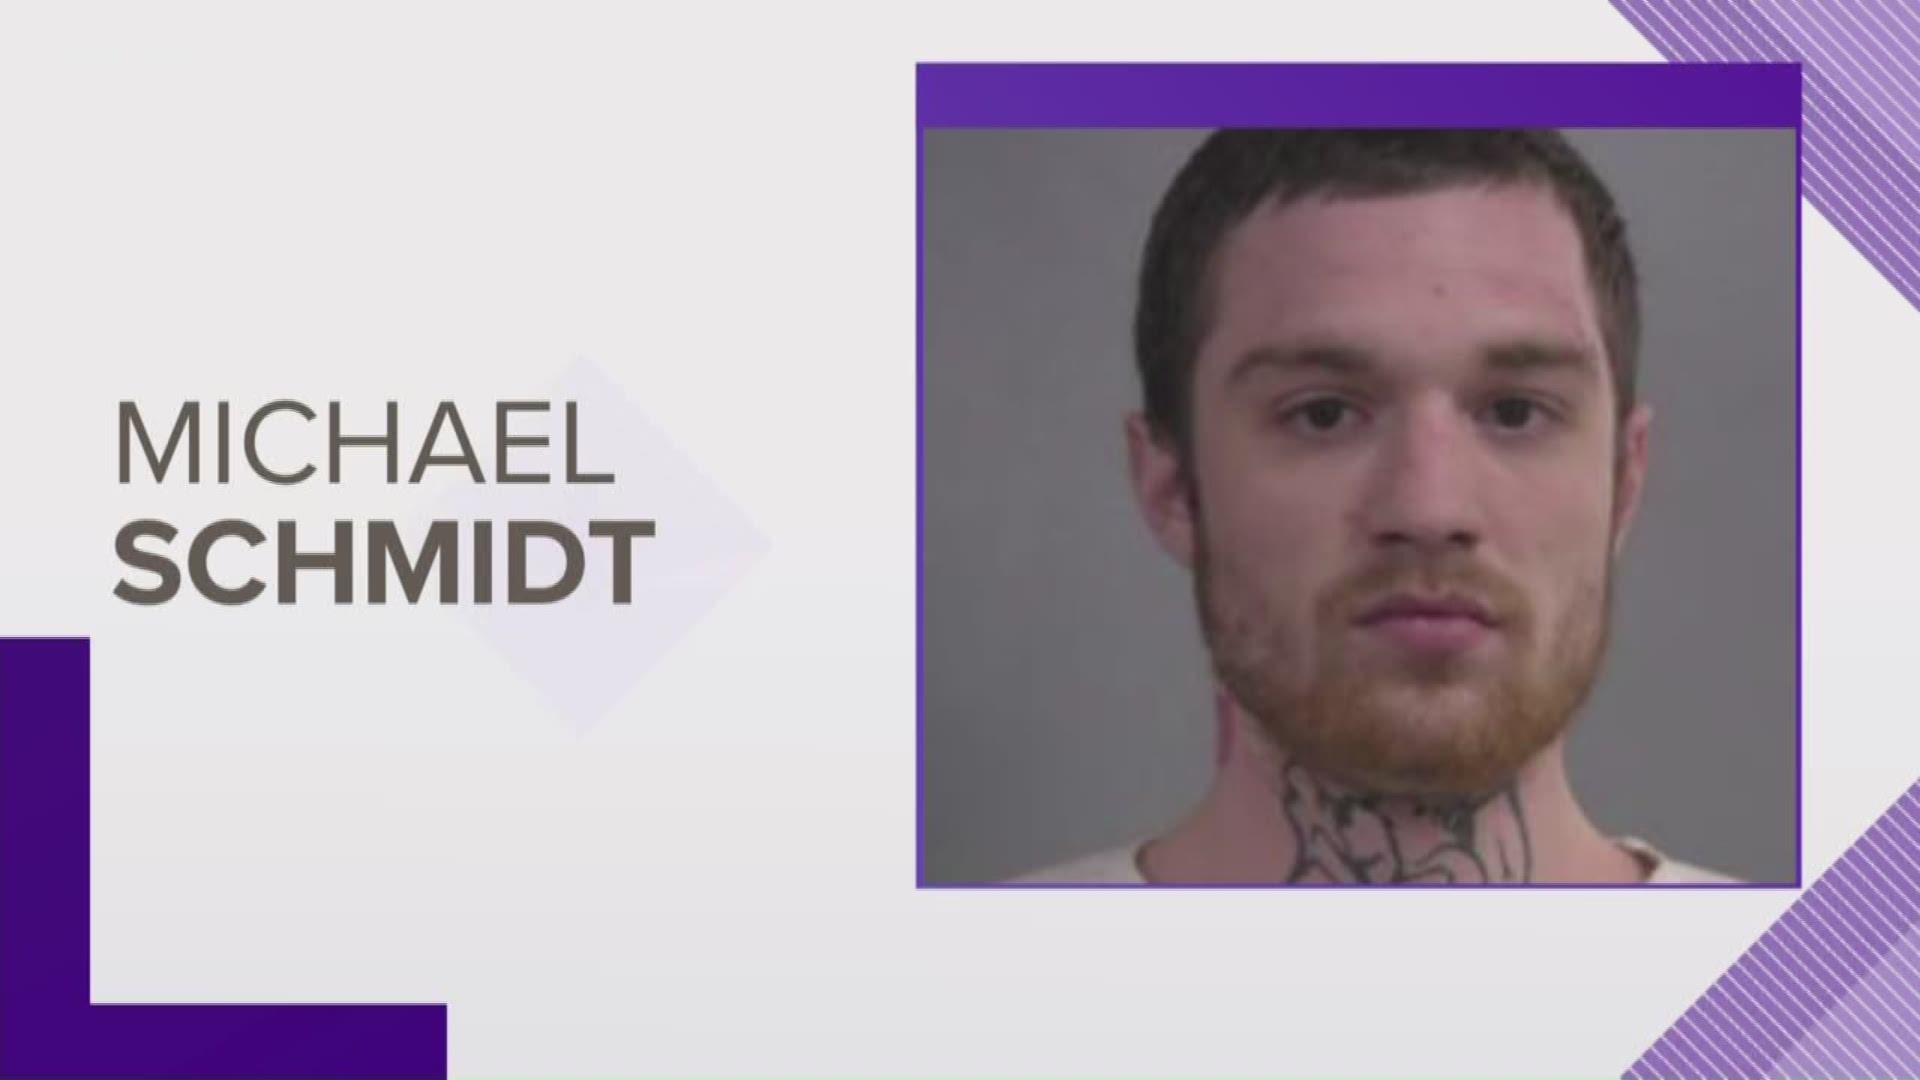 The driver told police that Michael Schmidt had threatened him, telling him not to stop the car.